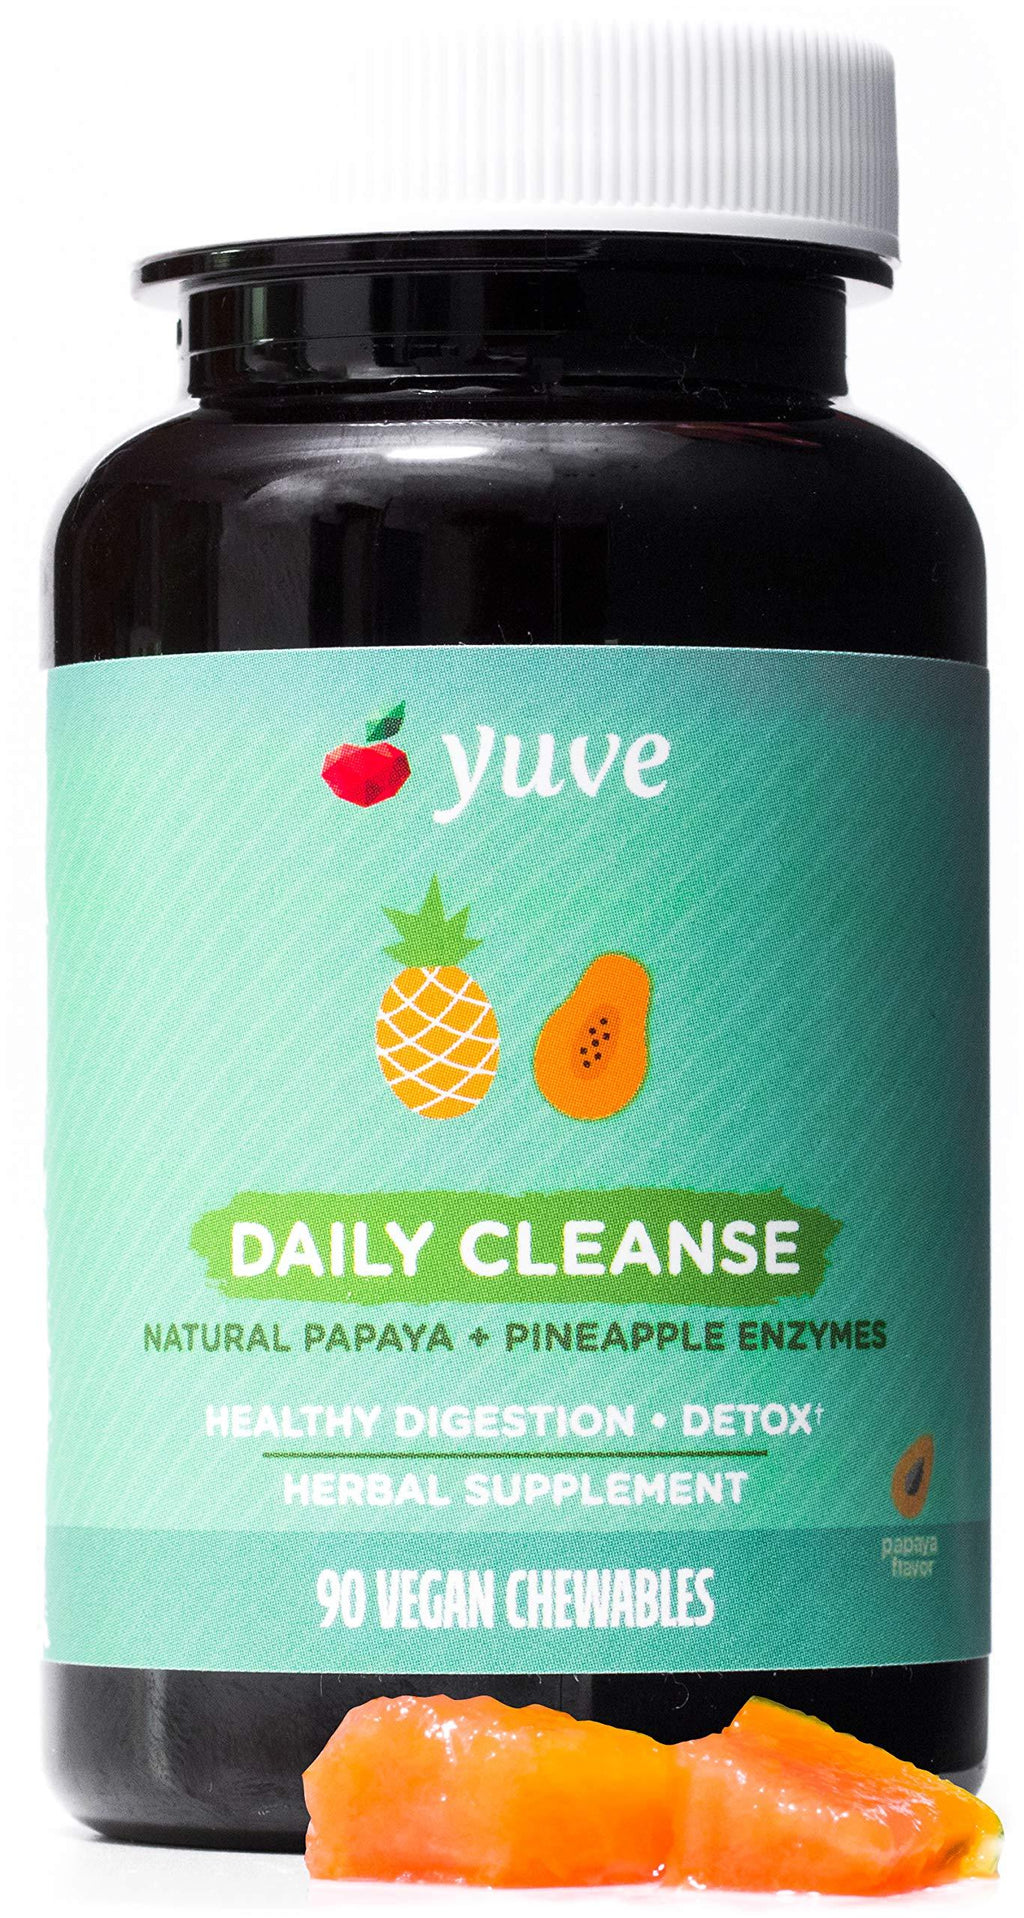 Yuve Natural Papaya Digestive Enzymes - Sugar-Free Chewable Candies - Promotes Better Digestion - Constipation & Bloating Aid, Detox, Leaky Gut Repair & Gas Relief - Vegan, Non-GMO, Gluten-Free - 90ct Papaya Flavor - BeesActive Australia